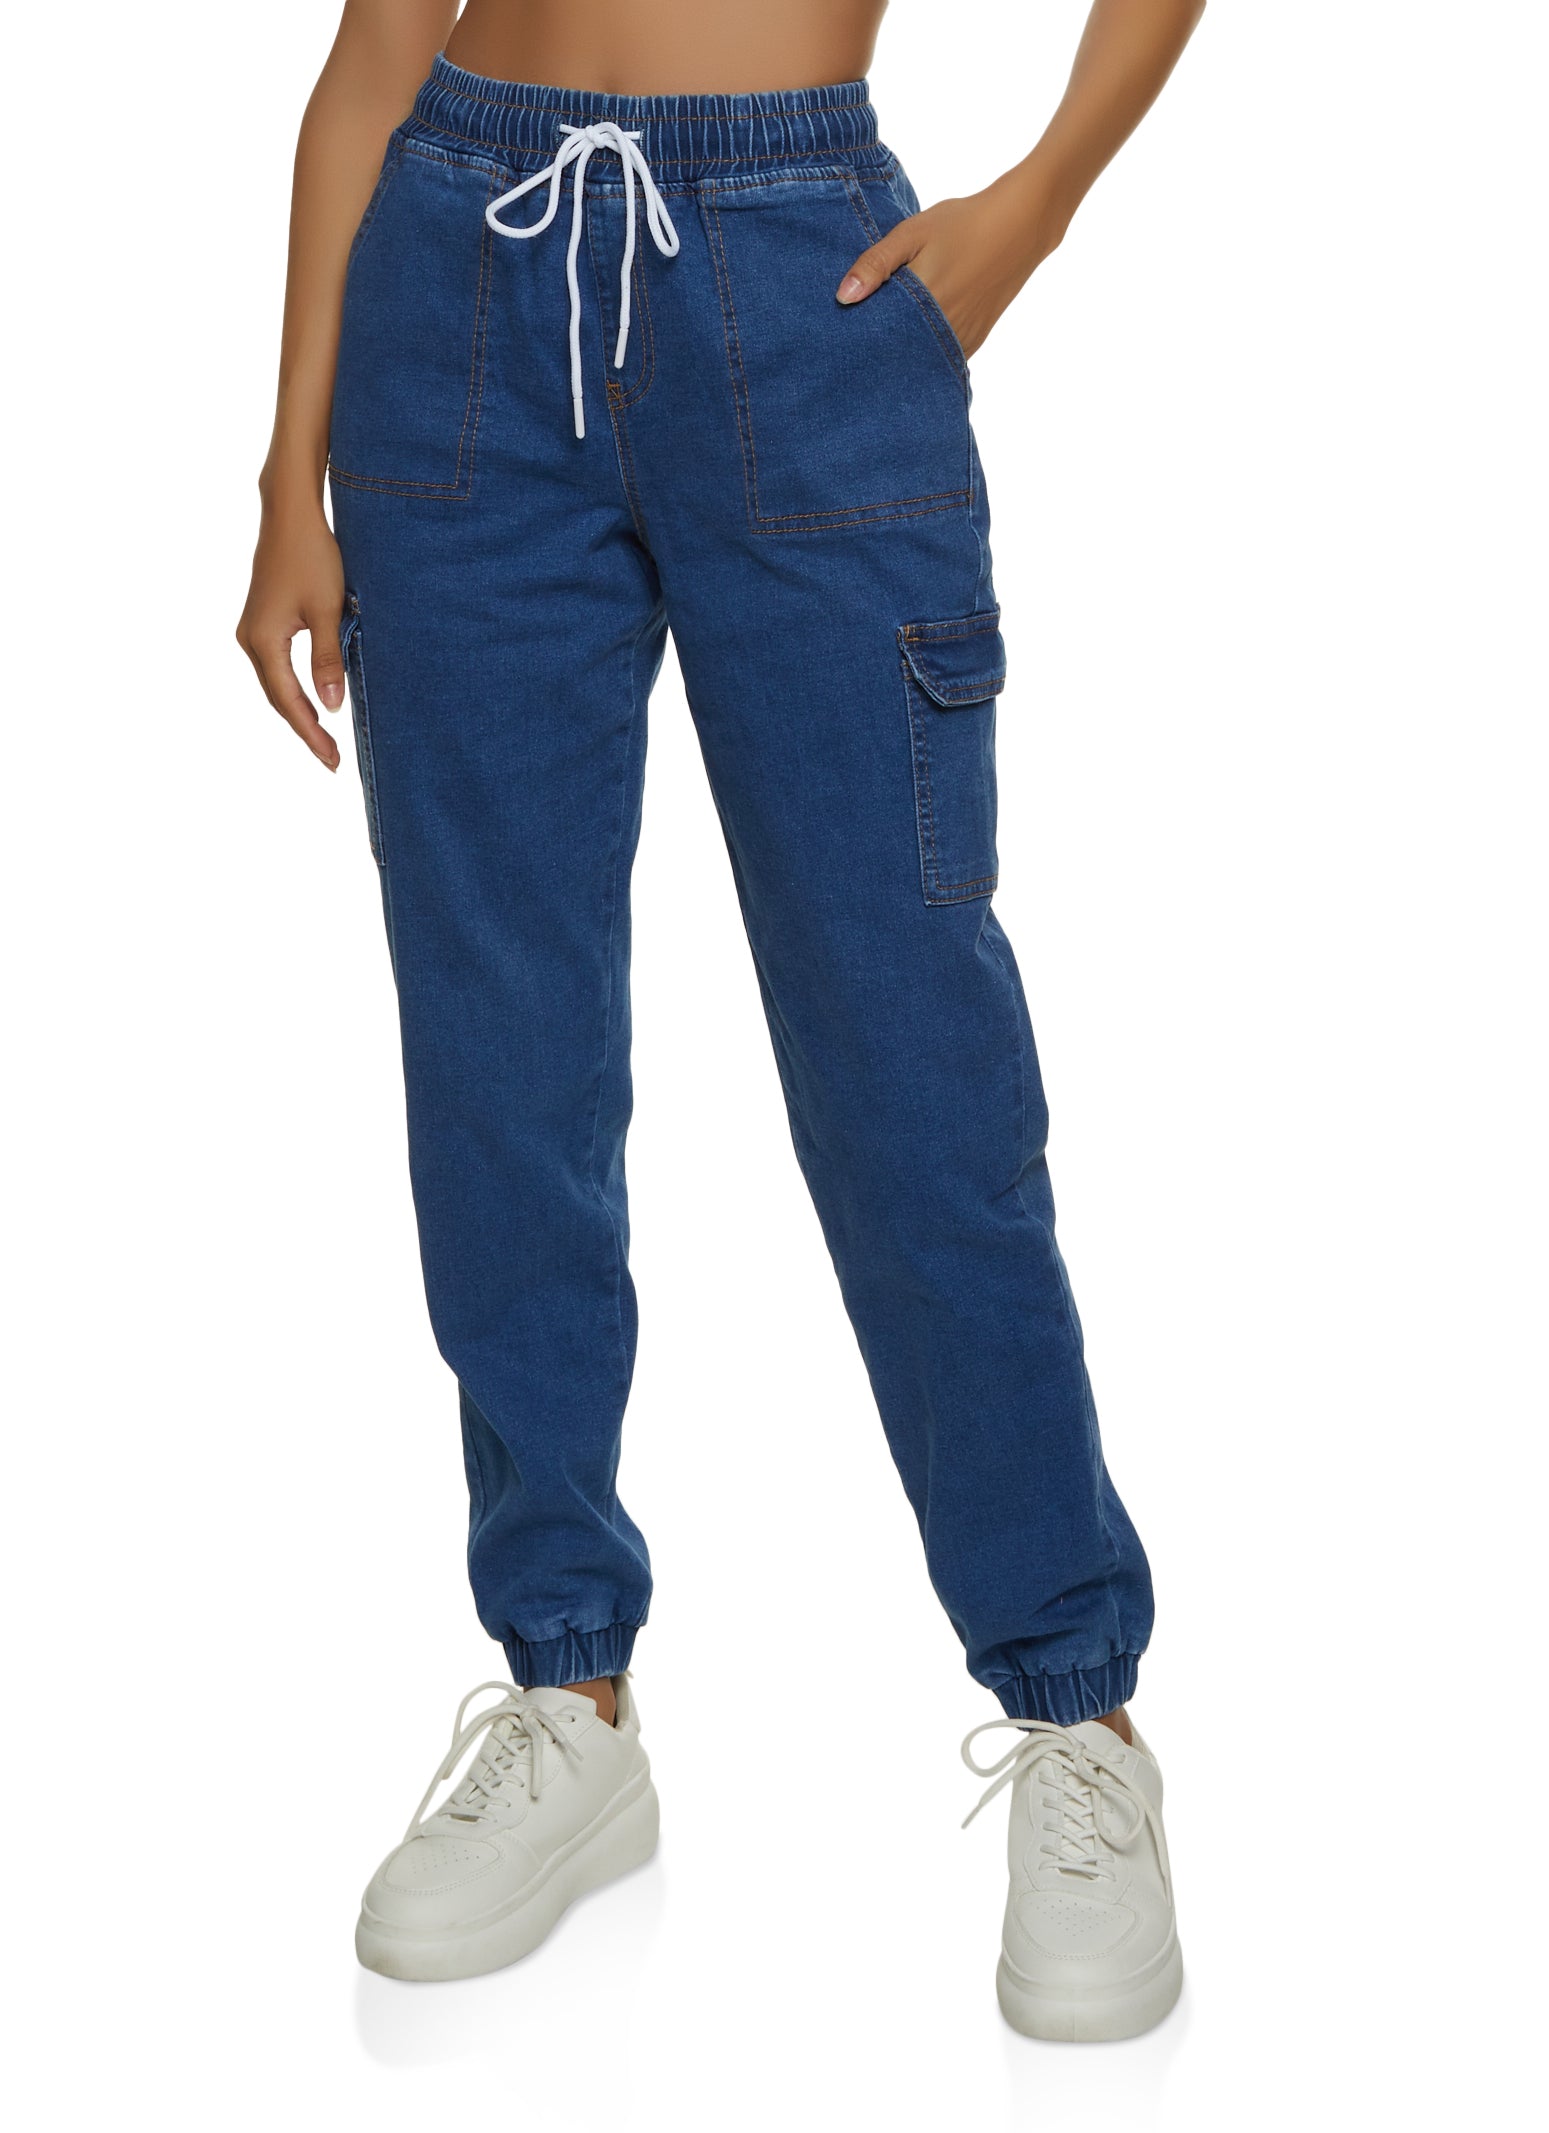 jogger mujer jeans